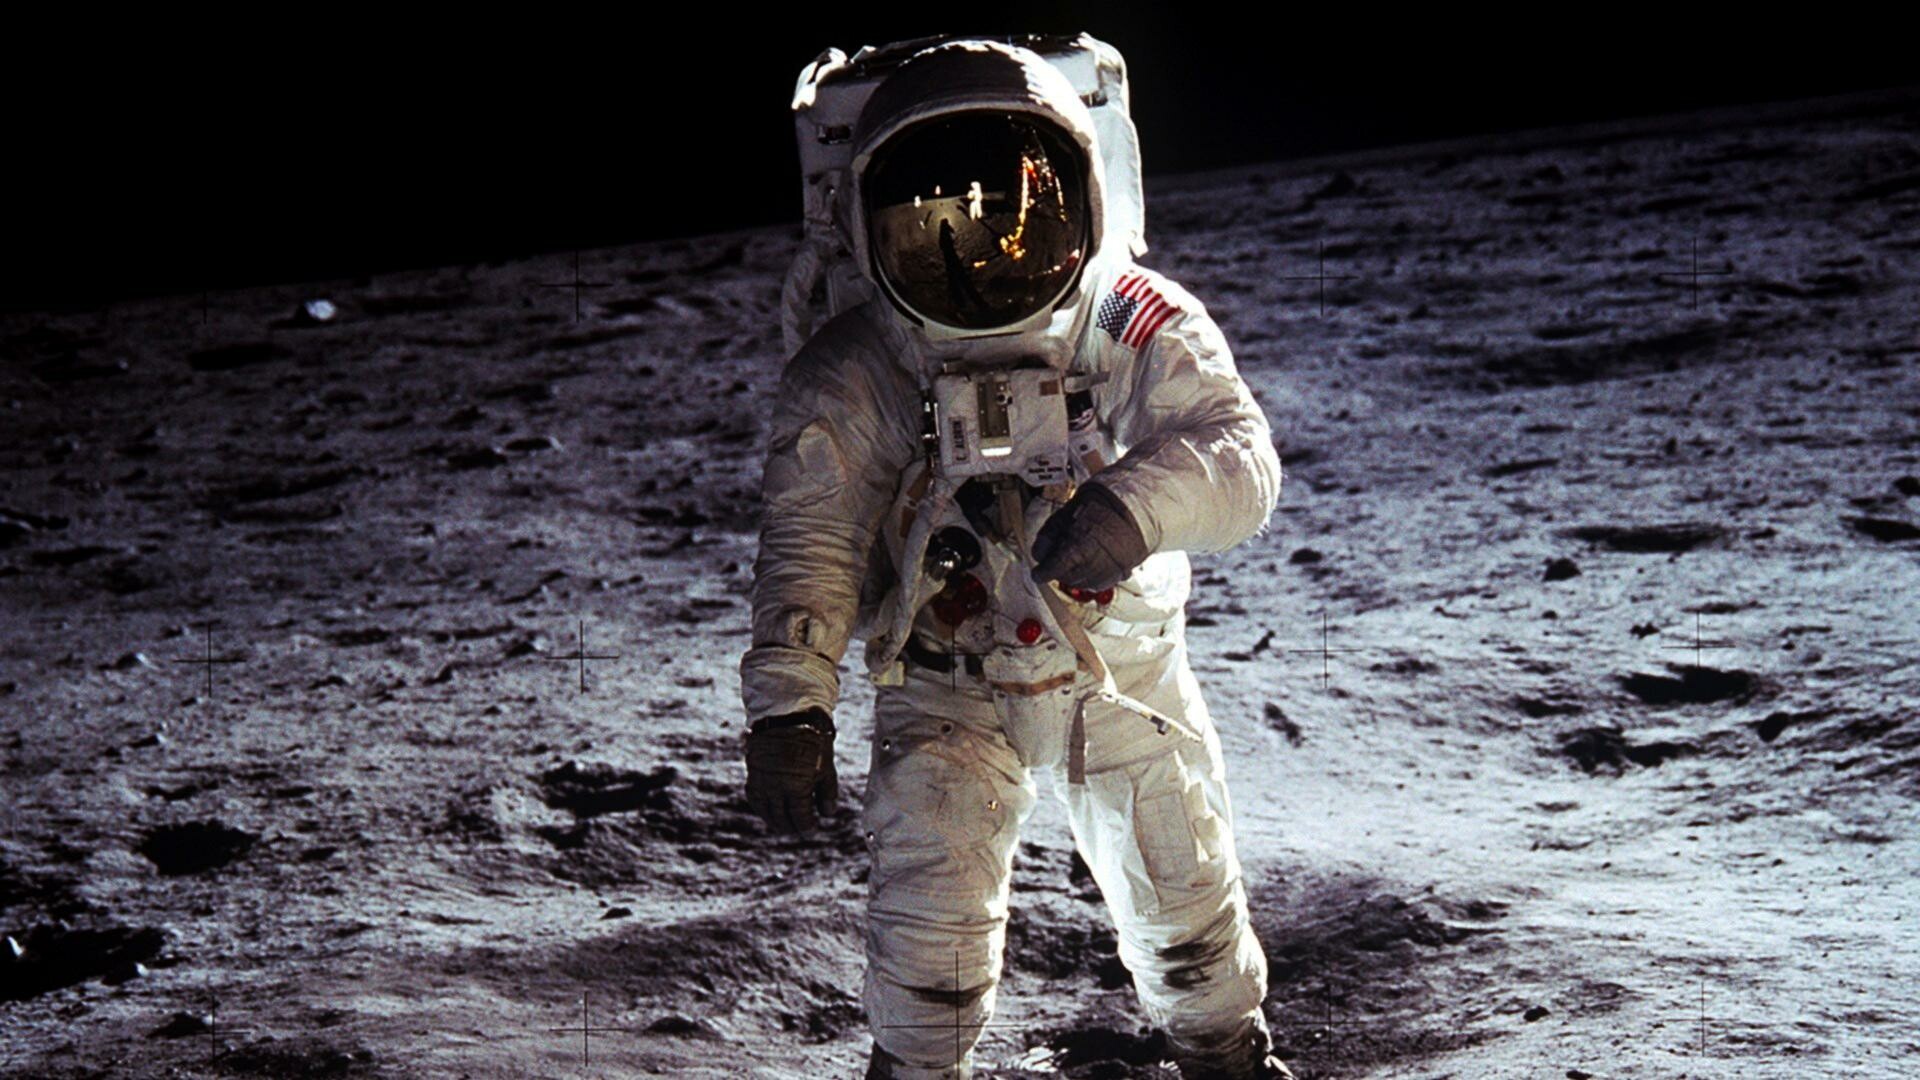 Neil Armstrong: The lunar lander spacecraft, Moon's surface, The United States' Apollo program. 1920x1080 Full HD Wallpaper.